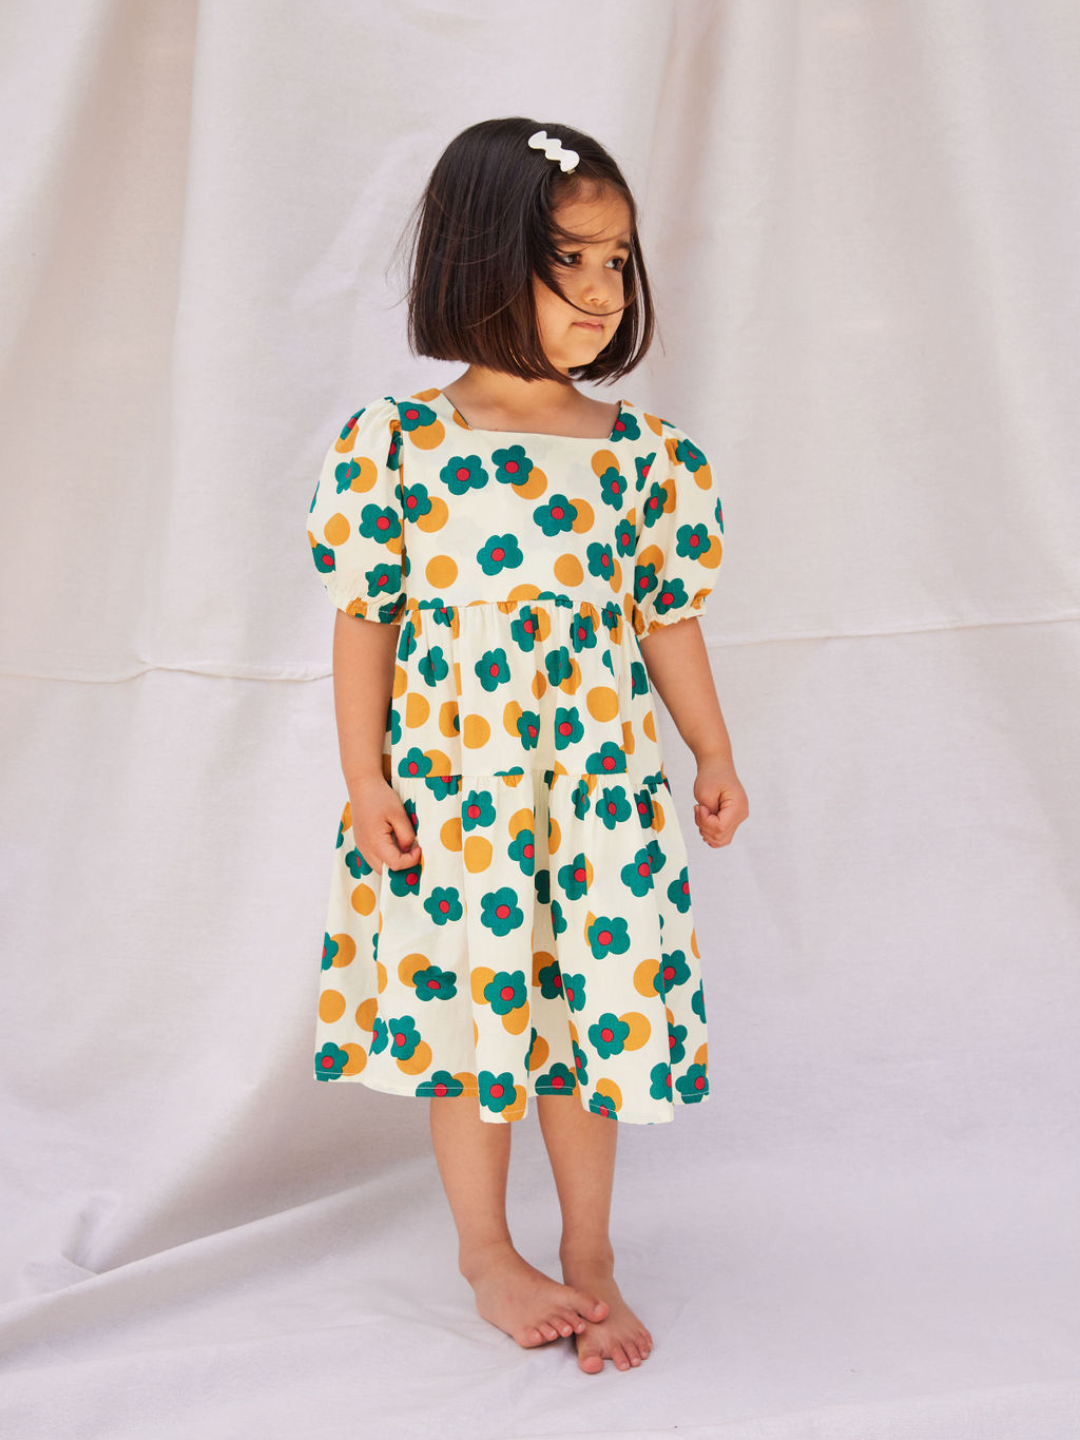 A child wearing a kids' tiered, puff-sleeved dress in a pattern of green and red flowers and ochre dots on a white background